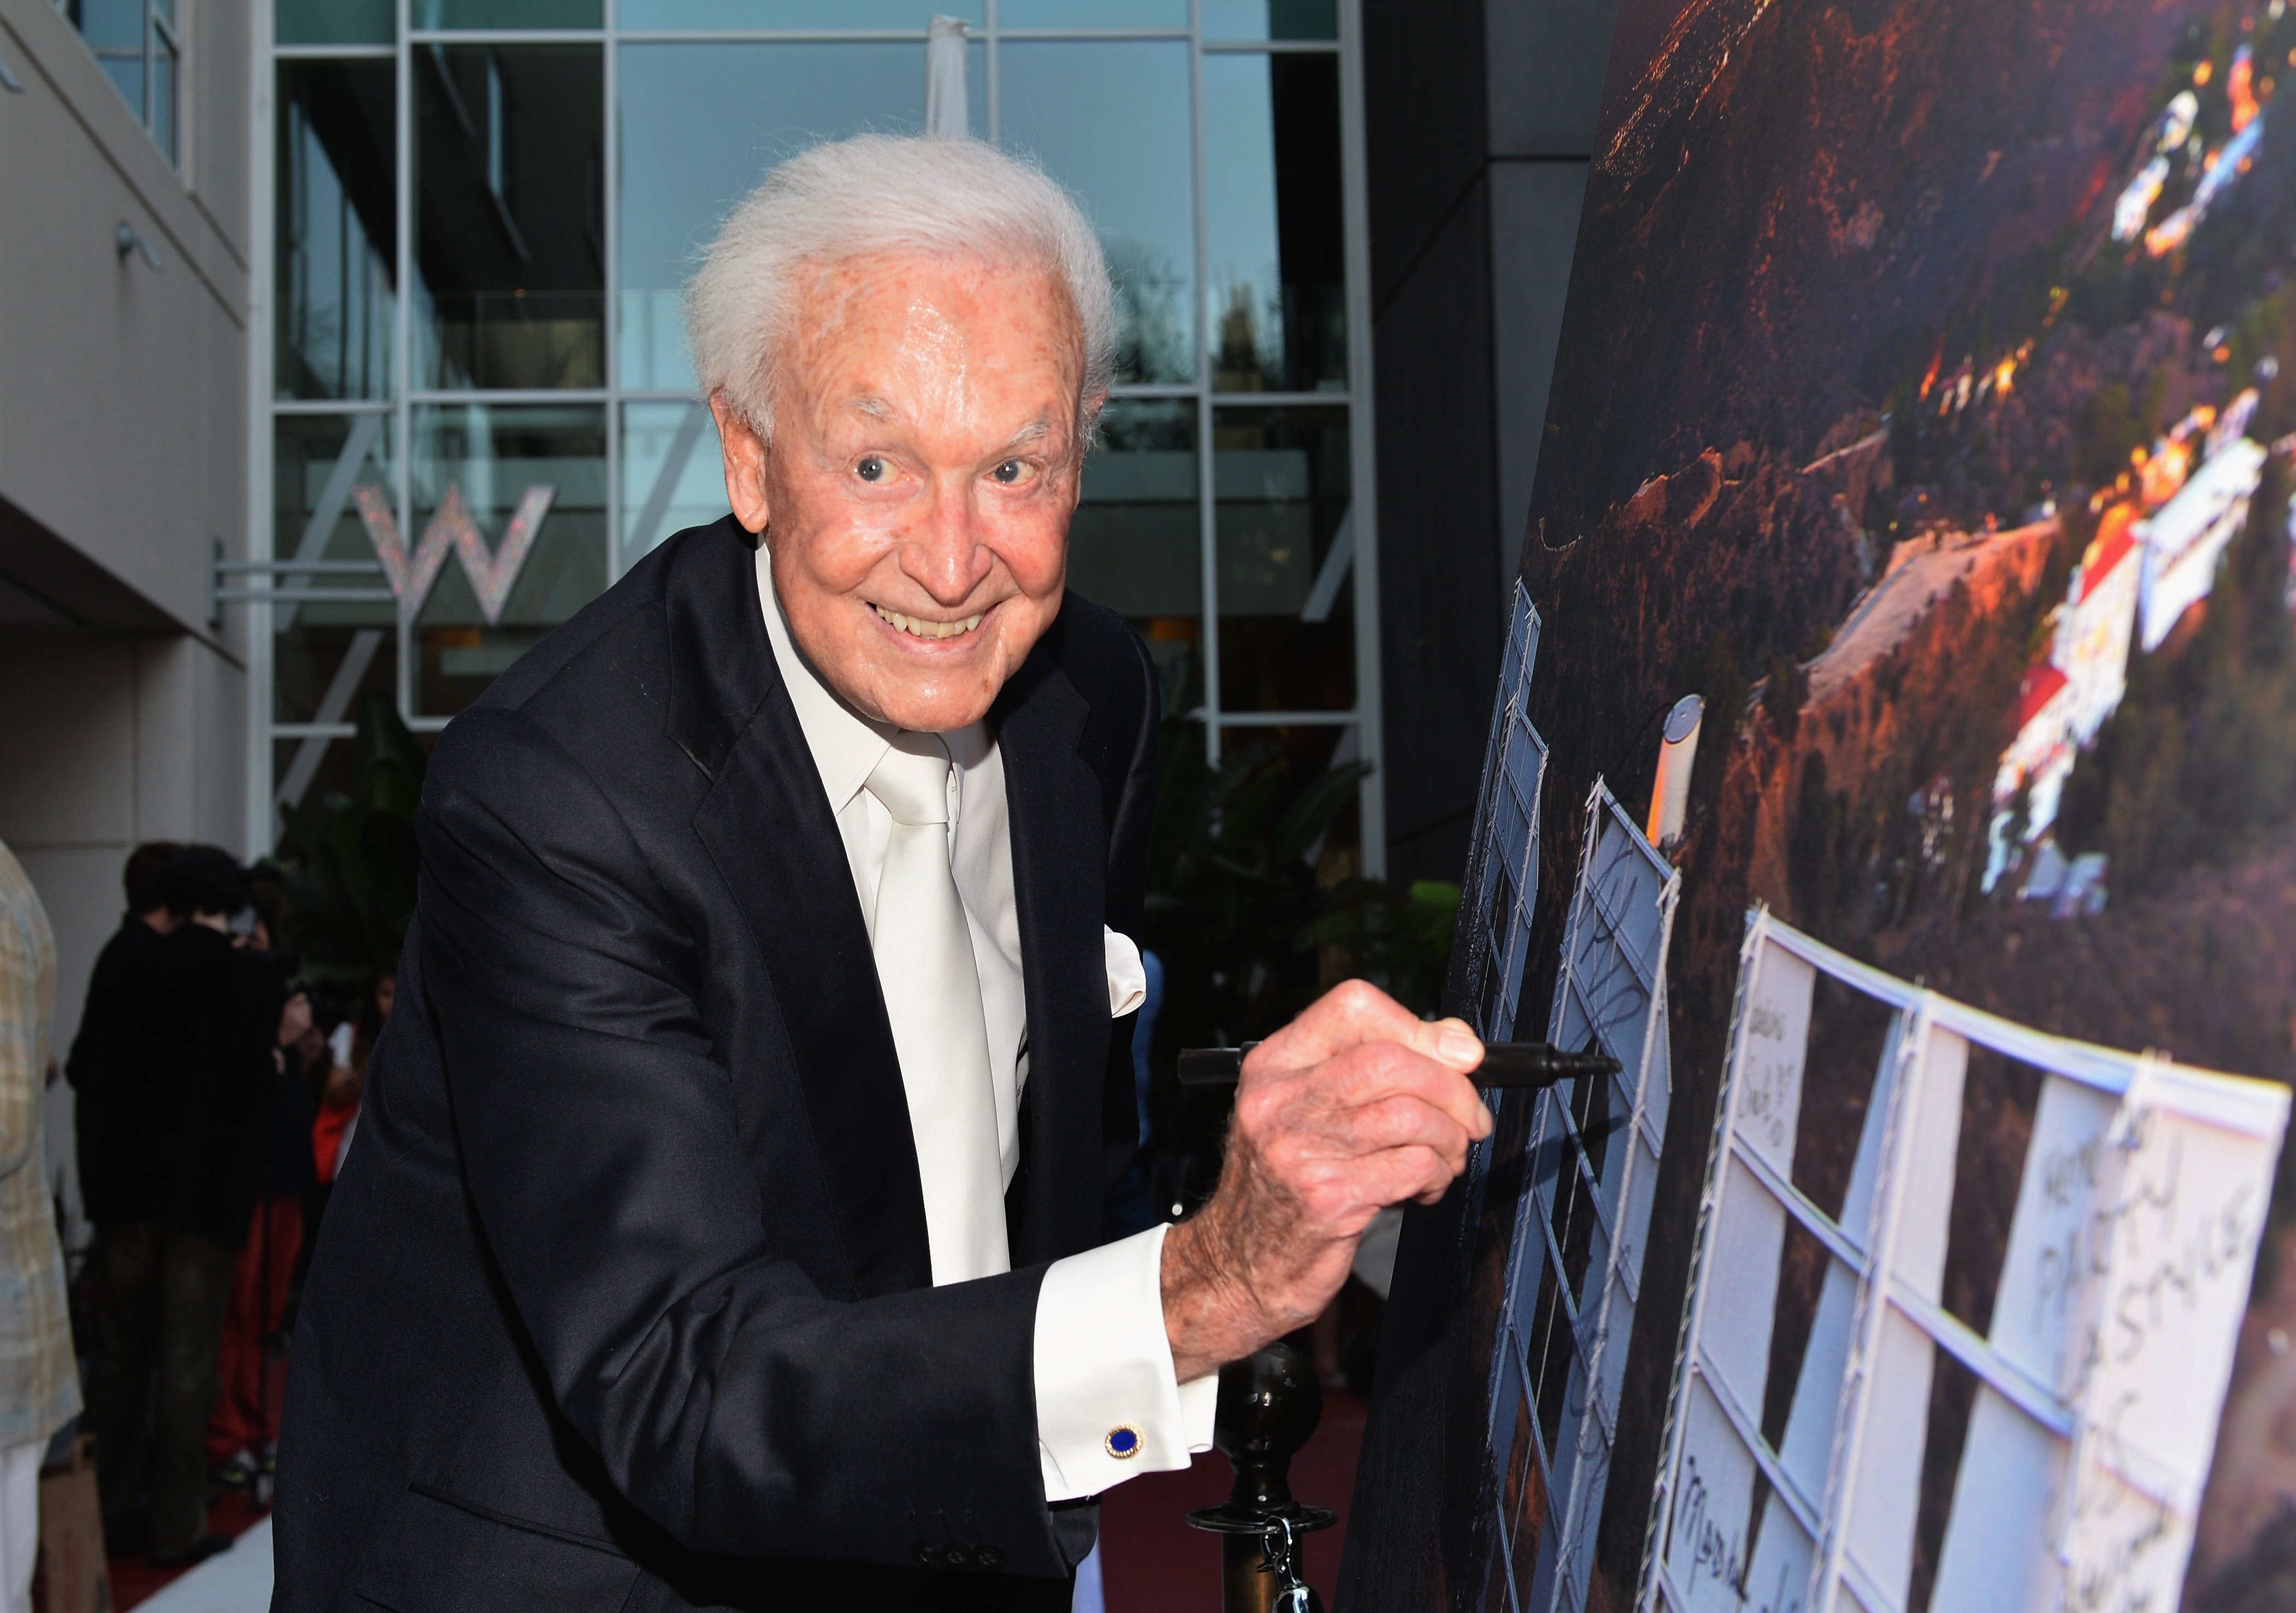 Bob Barker attends The Hollywood Chamber of Commerce & The Hollywood Sign Trust's 90th Celebration of the Hollywood Sign at Drai's Hollywood on September 19, 2013, in Hollywood, California. | Source: Getty Images